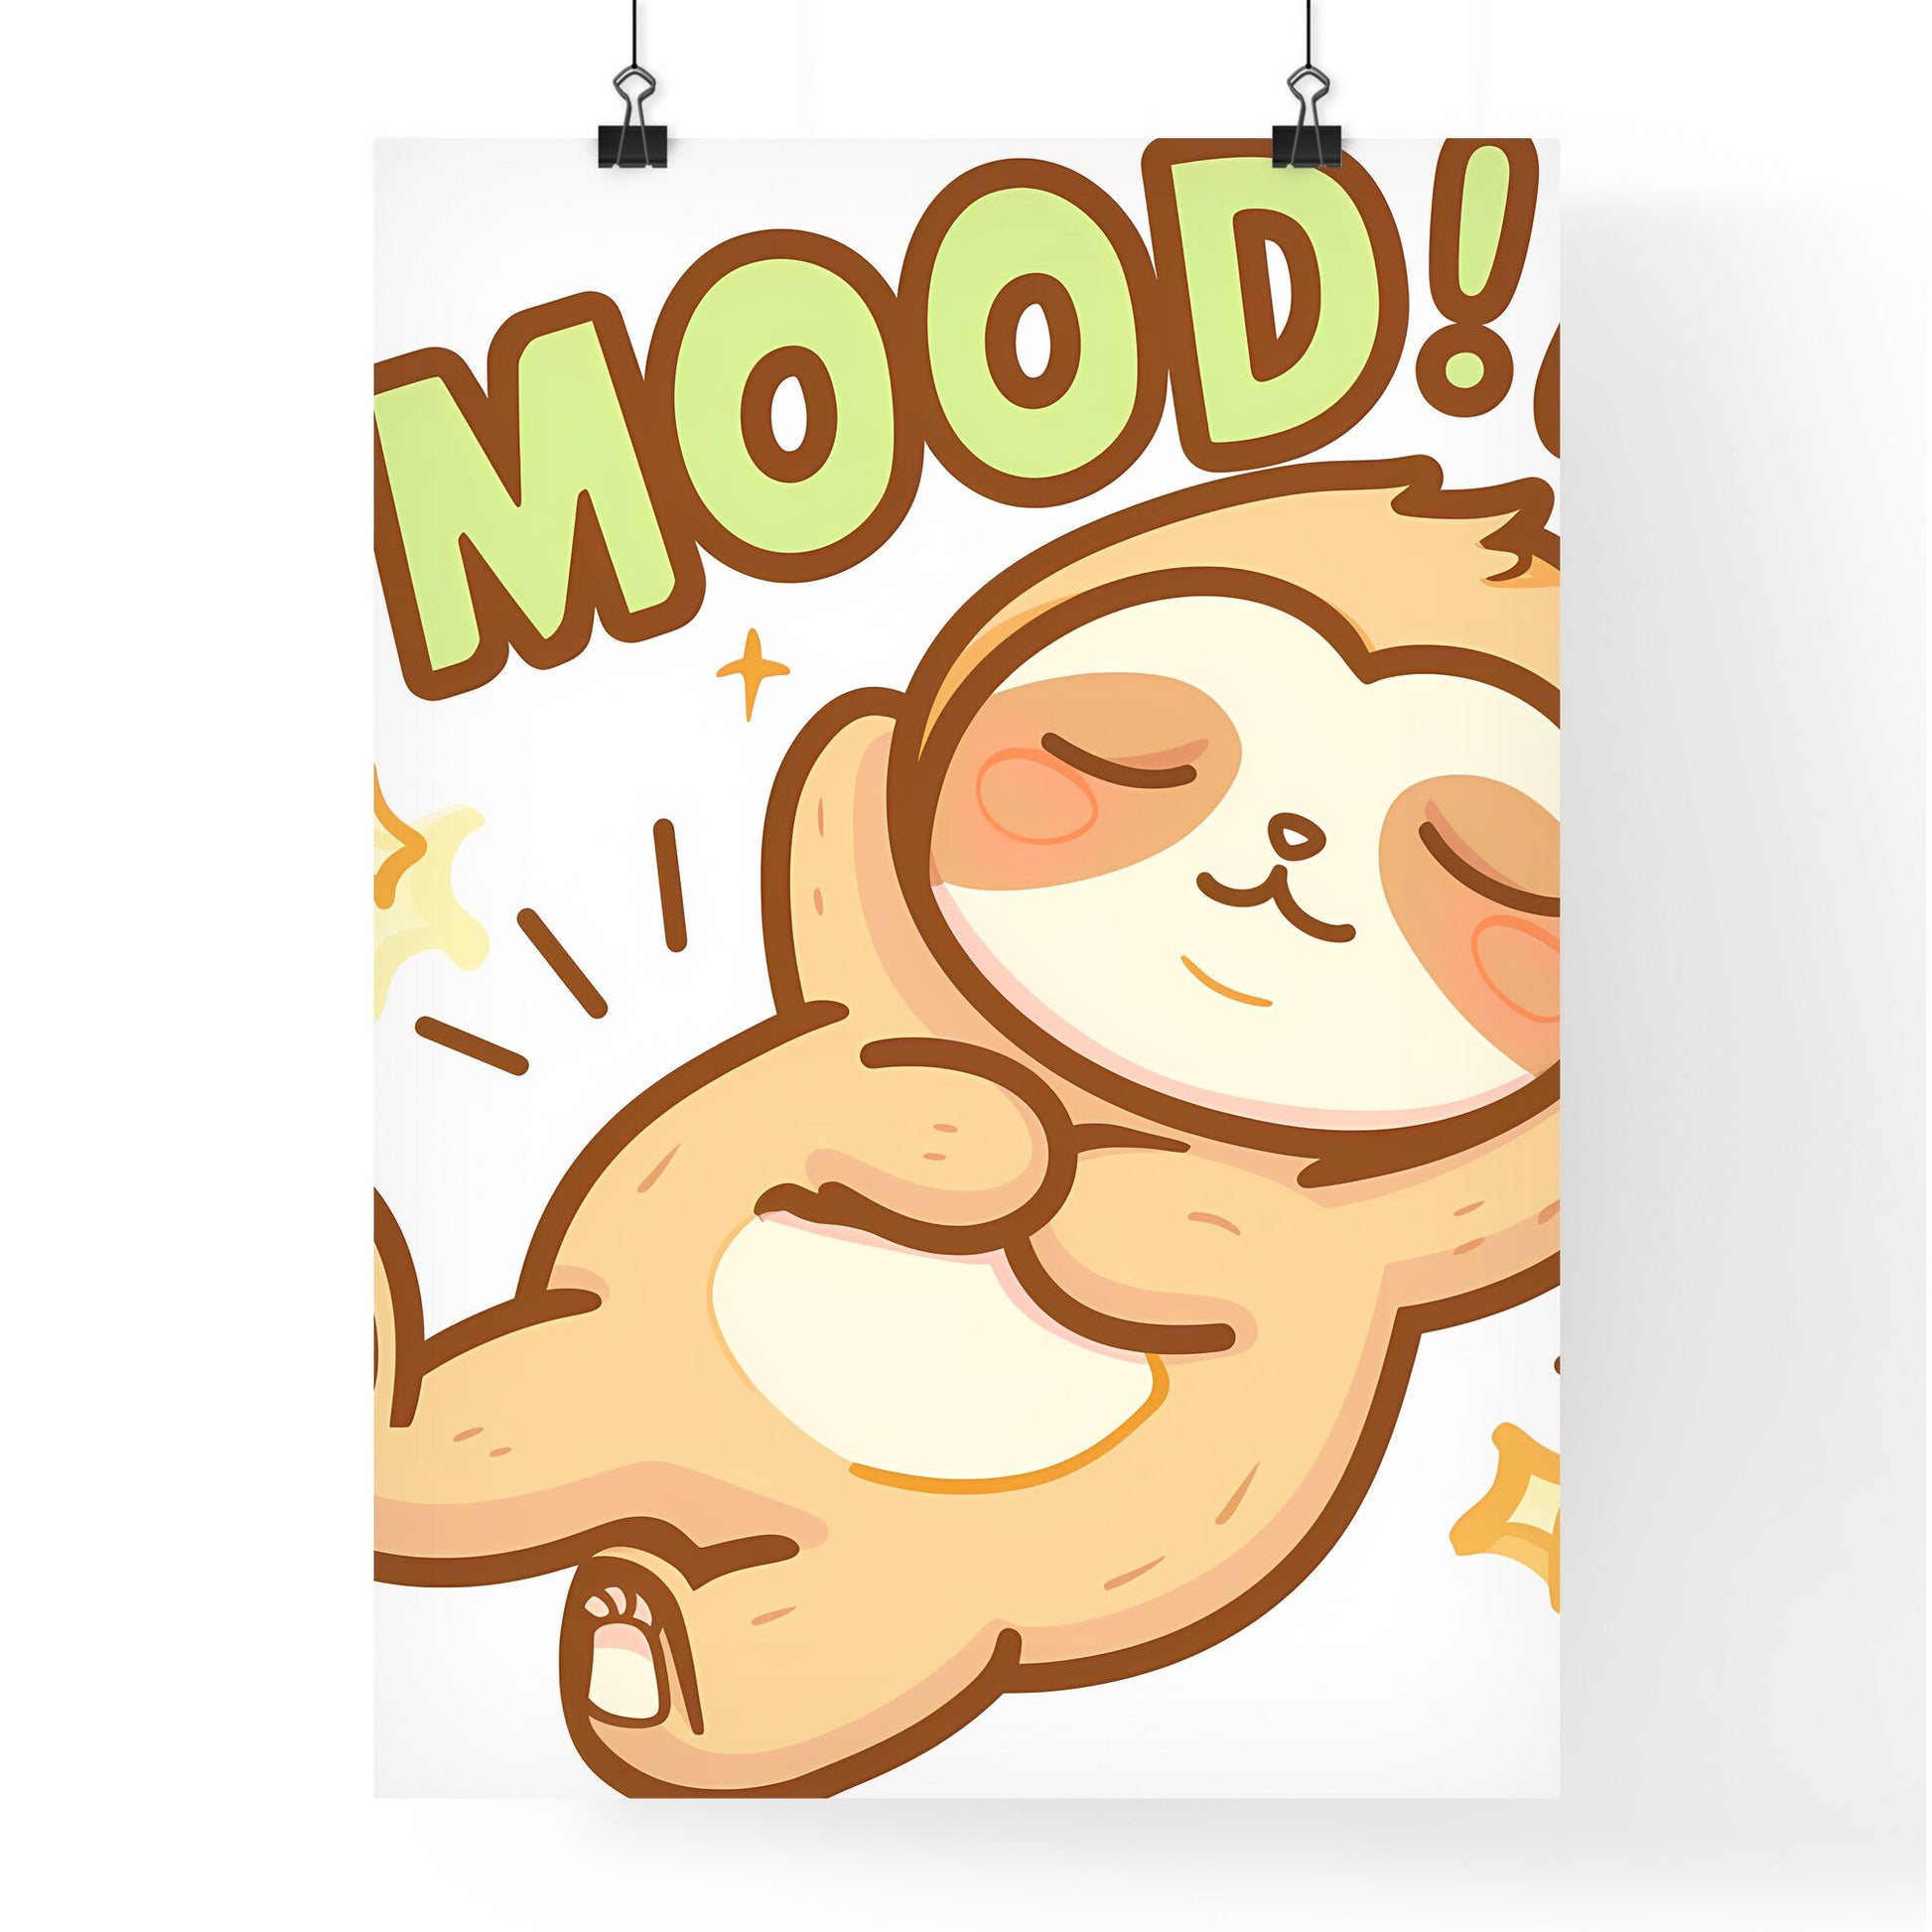 A Poster of Kawaii Sleeping Sloth With Big Letters #Mood Vector Art - A Cartoon Of A Sloth Default Title